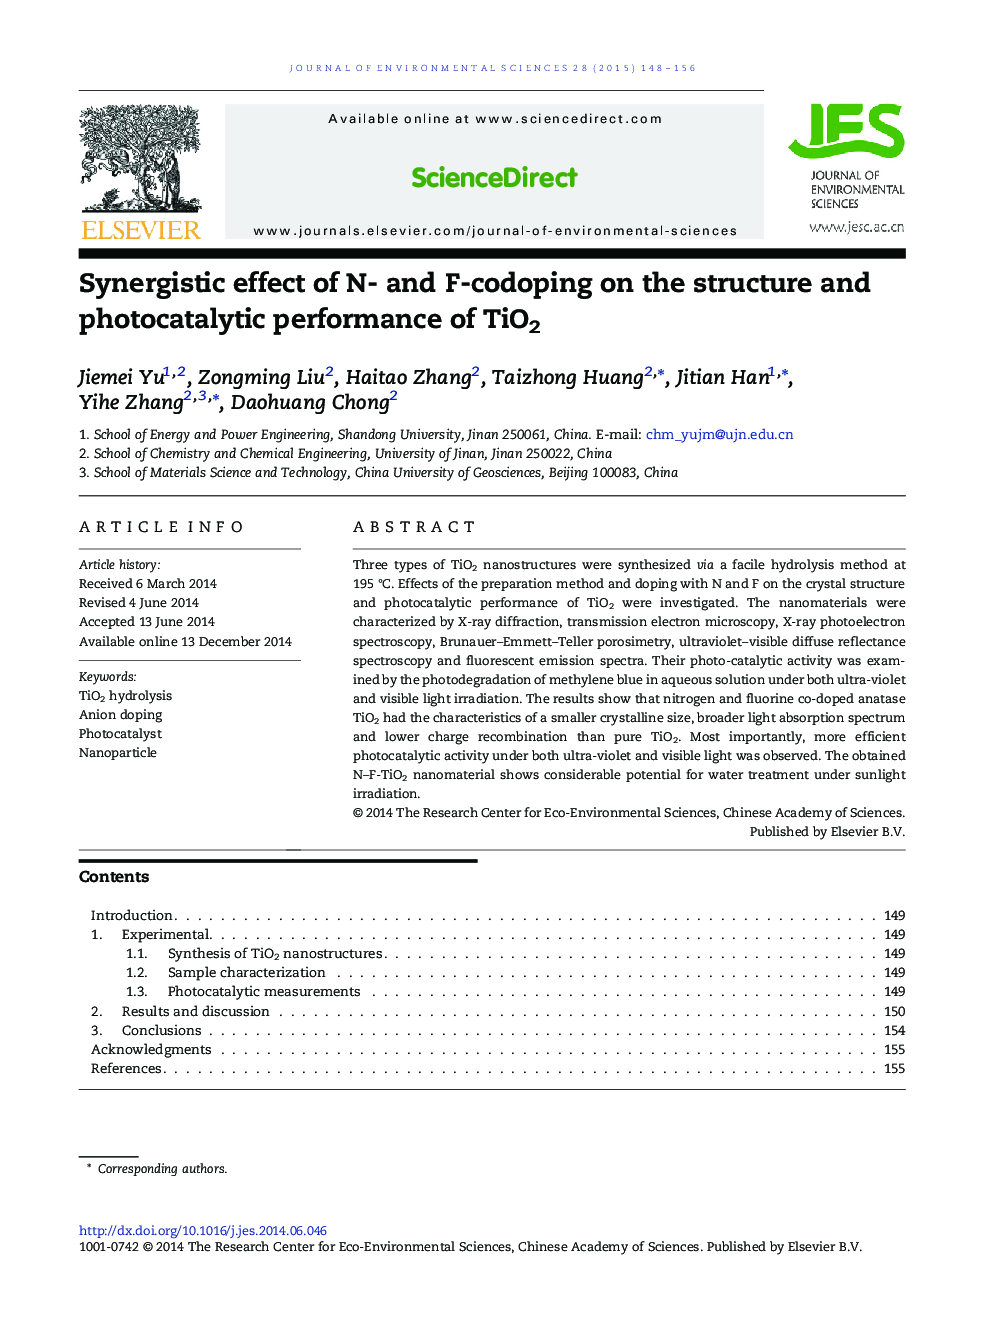 Synergistic effect of N- and F-codoping on the structure and photocatalytic performance of TiO2